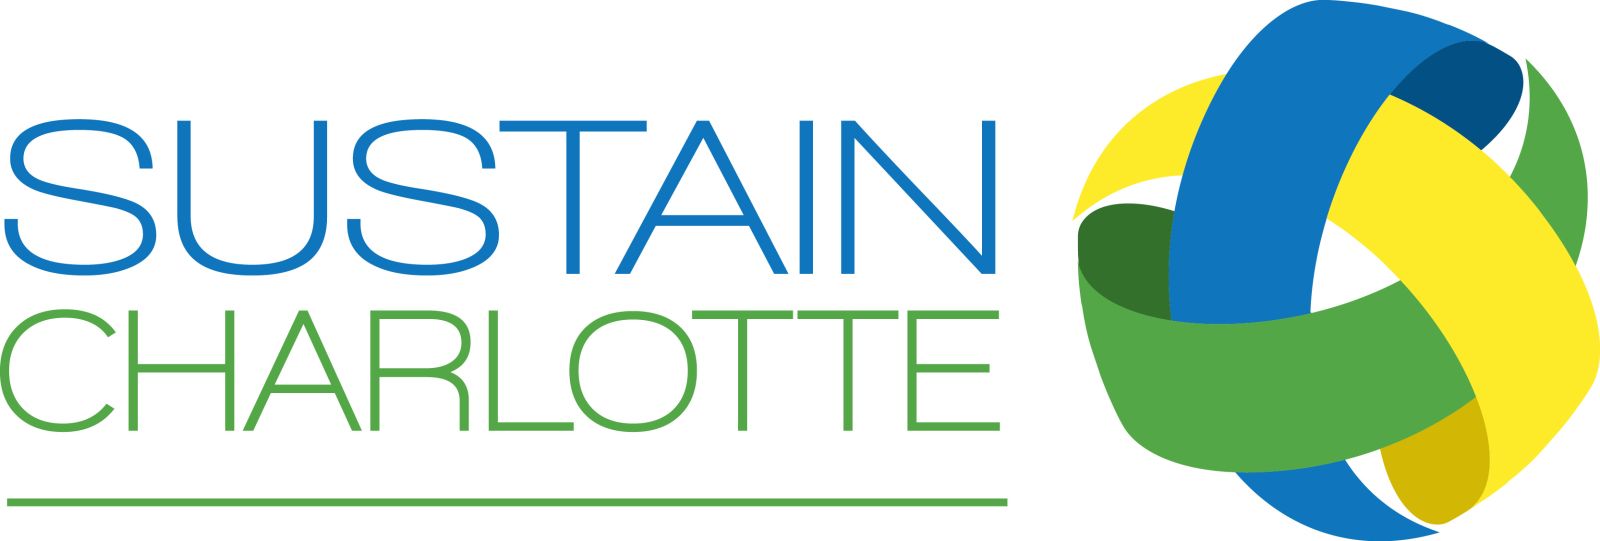 SustainCLT_Logo_Stacked_Color.jpg